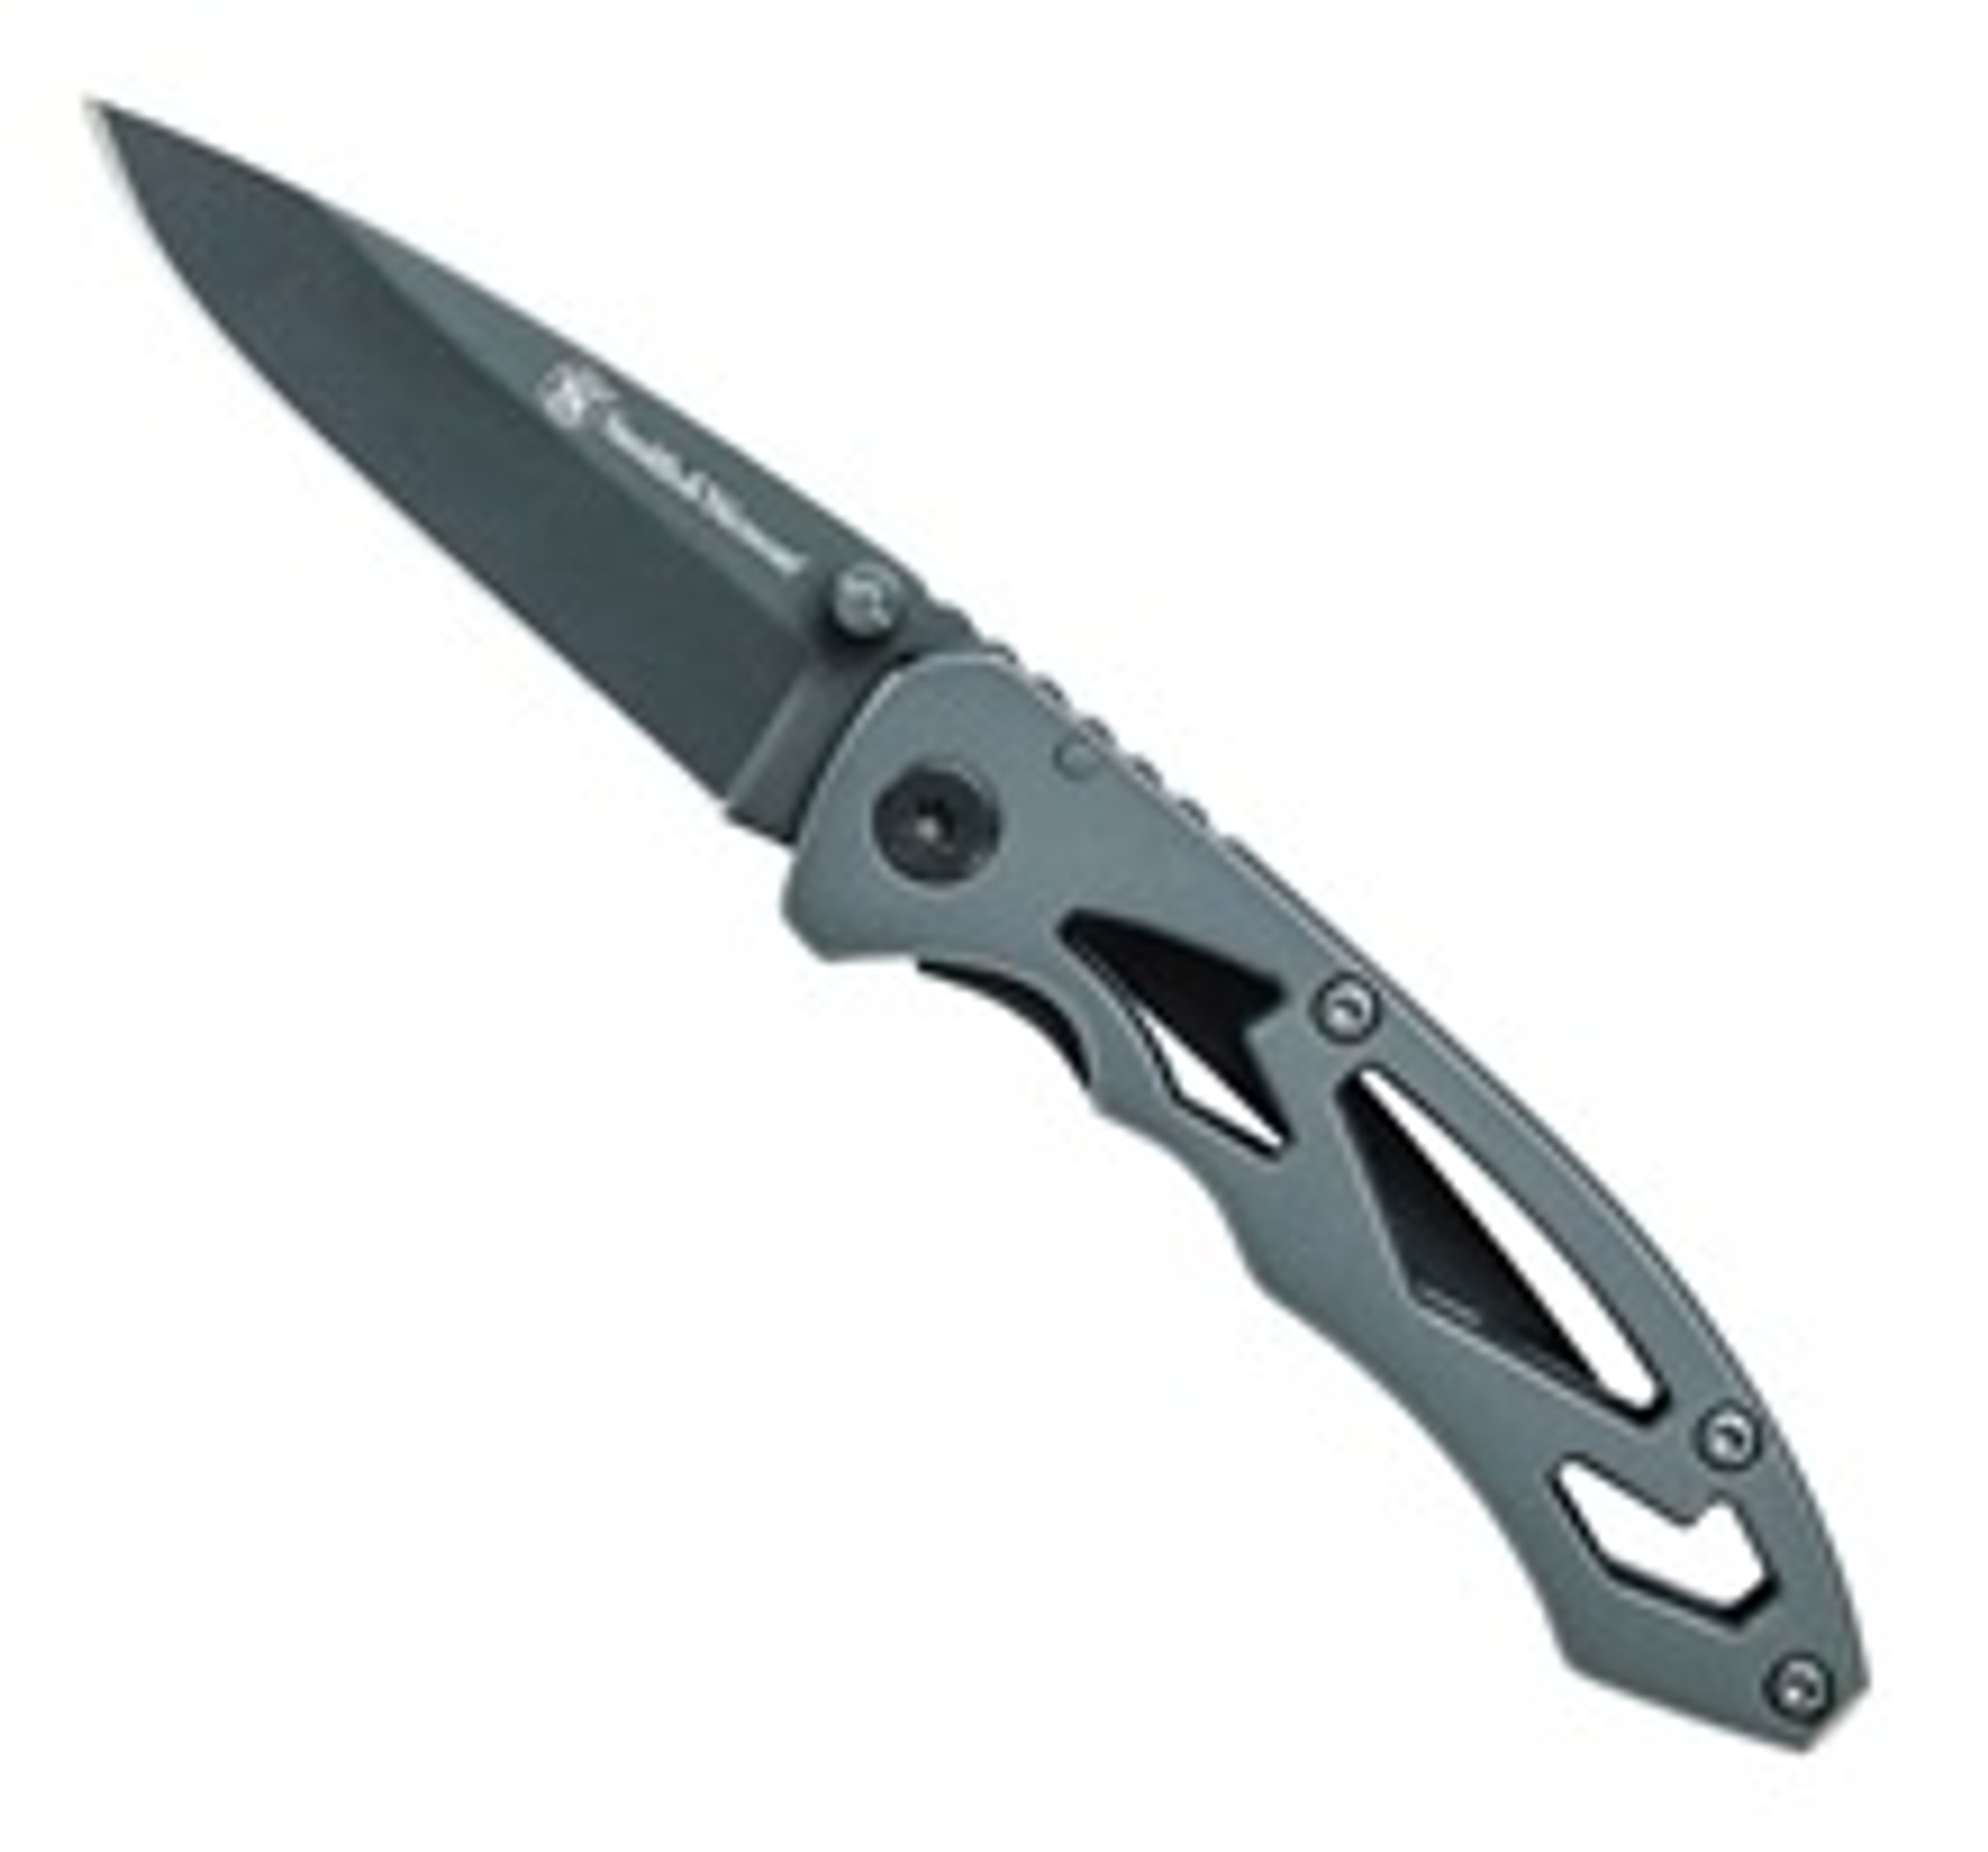 Smith & Wesson Frame Lock Drop Point 2.22" Folding Knife